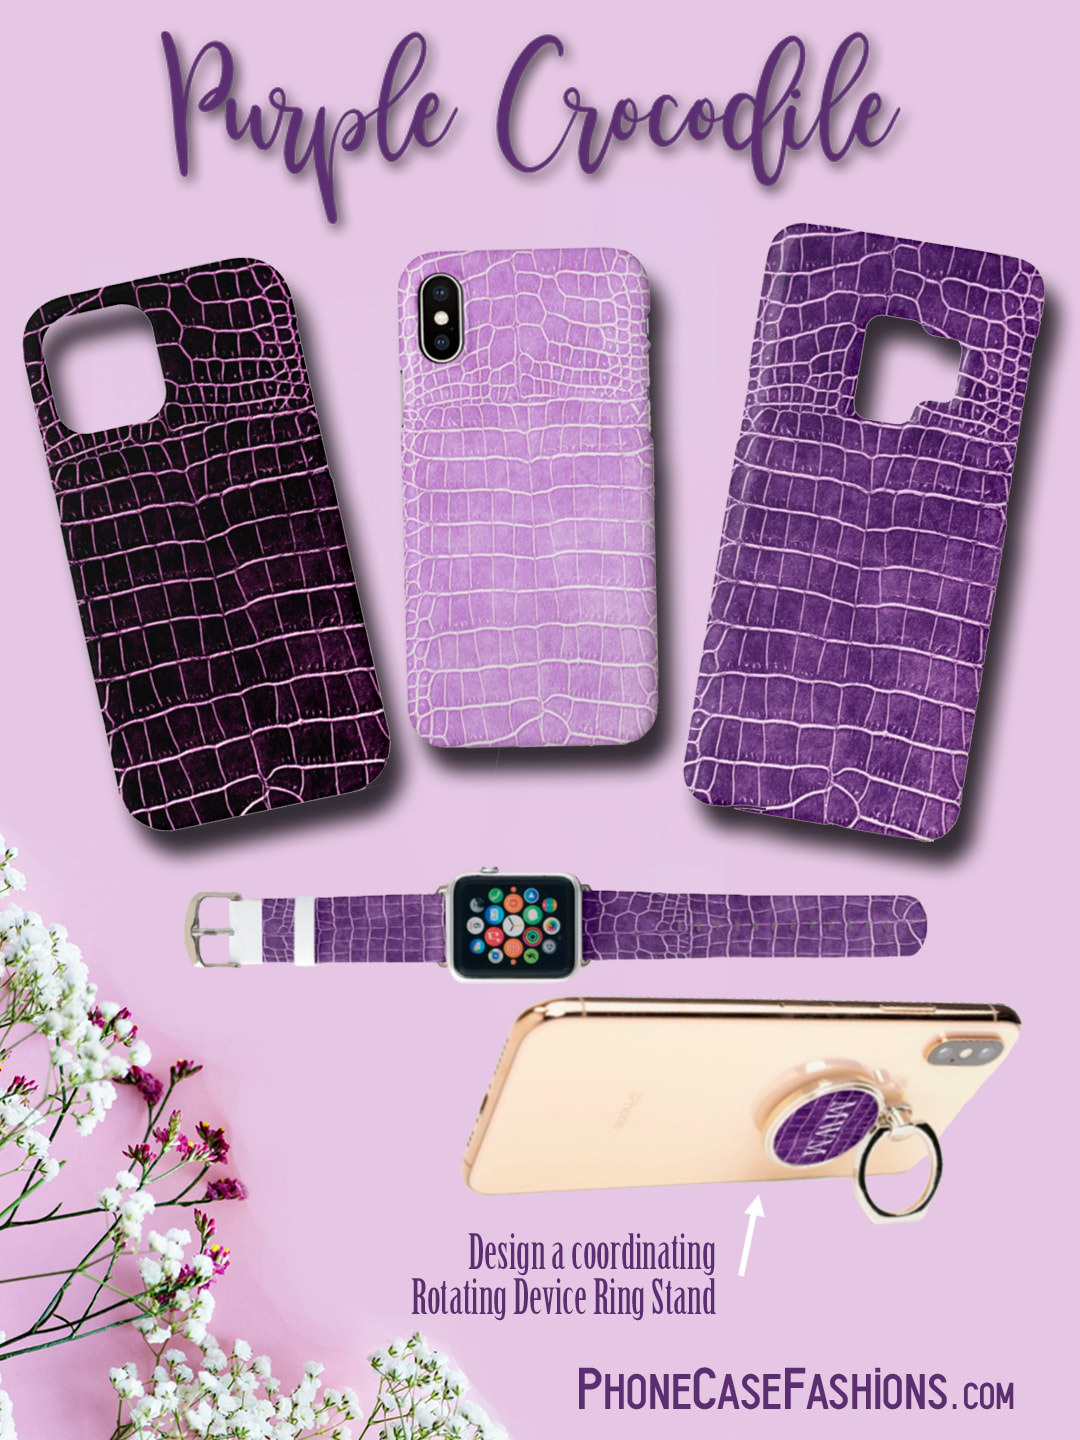 If purple, lavender or eggplant is your thing and you're wild about animal prints, these faux crocodile cell phone cases are the perfect addition to your accessories wardrobe. Don't hide behind an ugly case! Shop PhoneCaseFashions.com